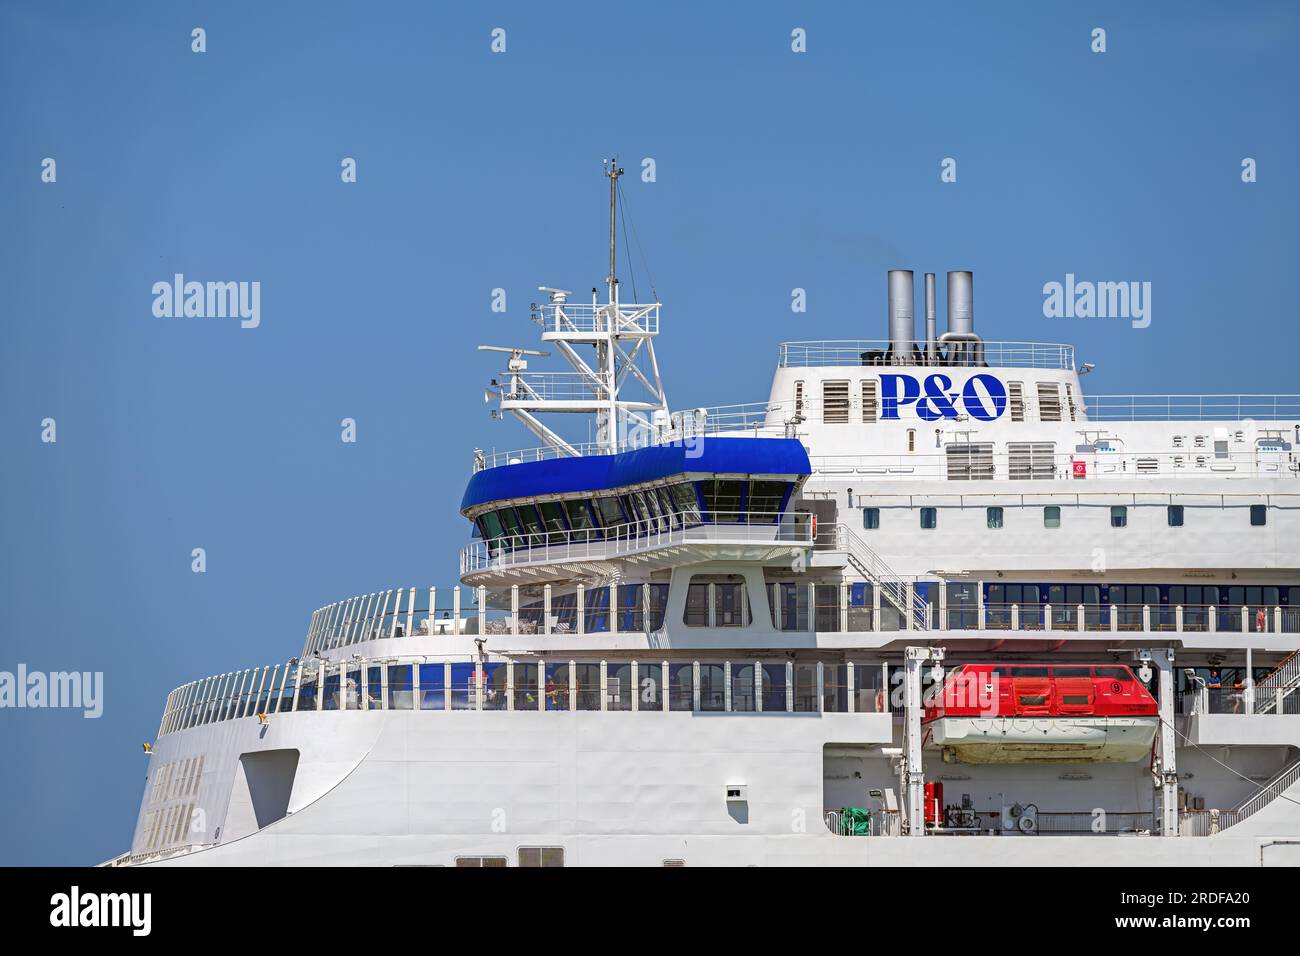 P&O Pioneer is a double-ended cross-Channel ferry operated by P&O Ferries between Dover and Calais. Stock Photo